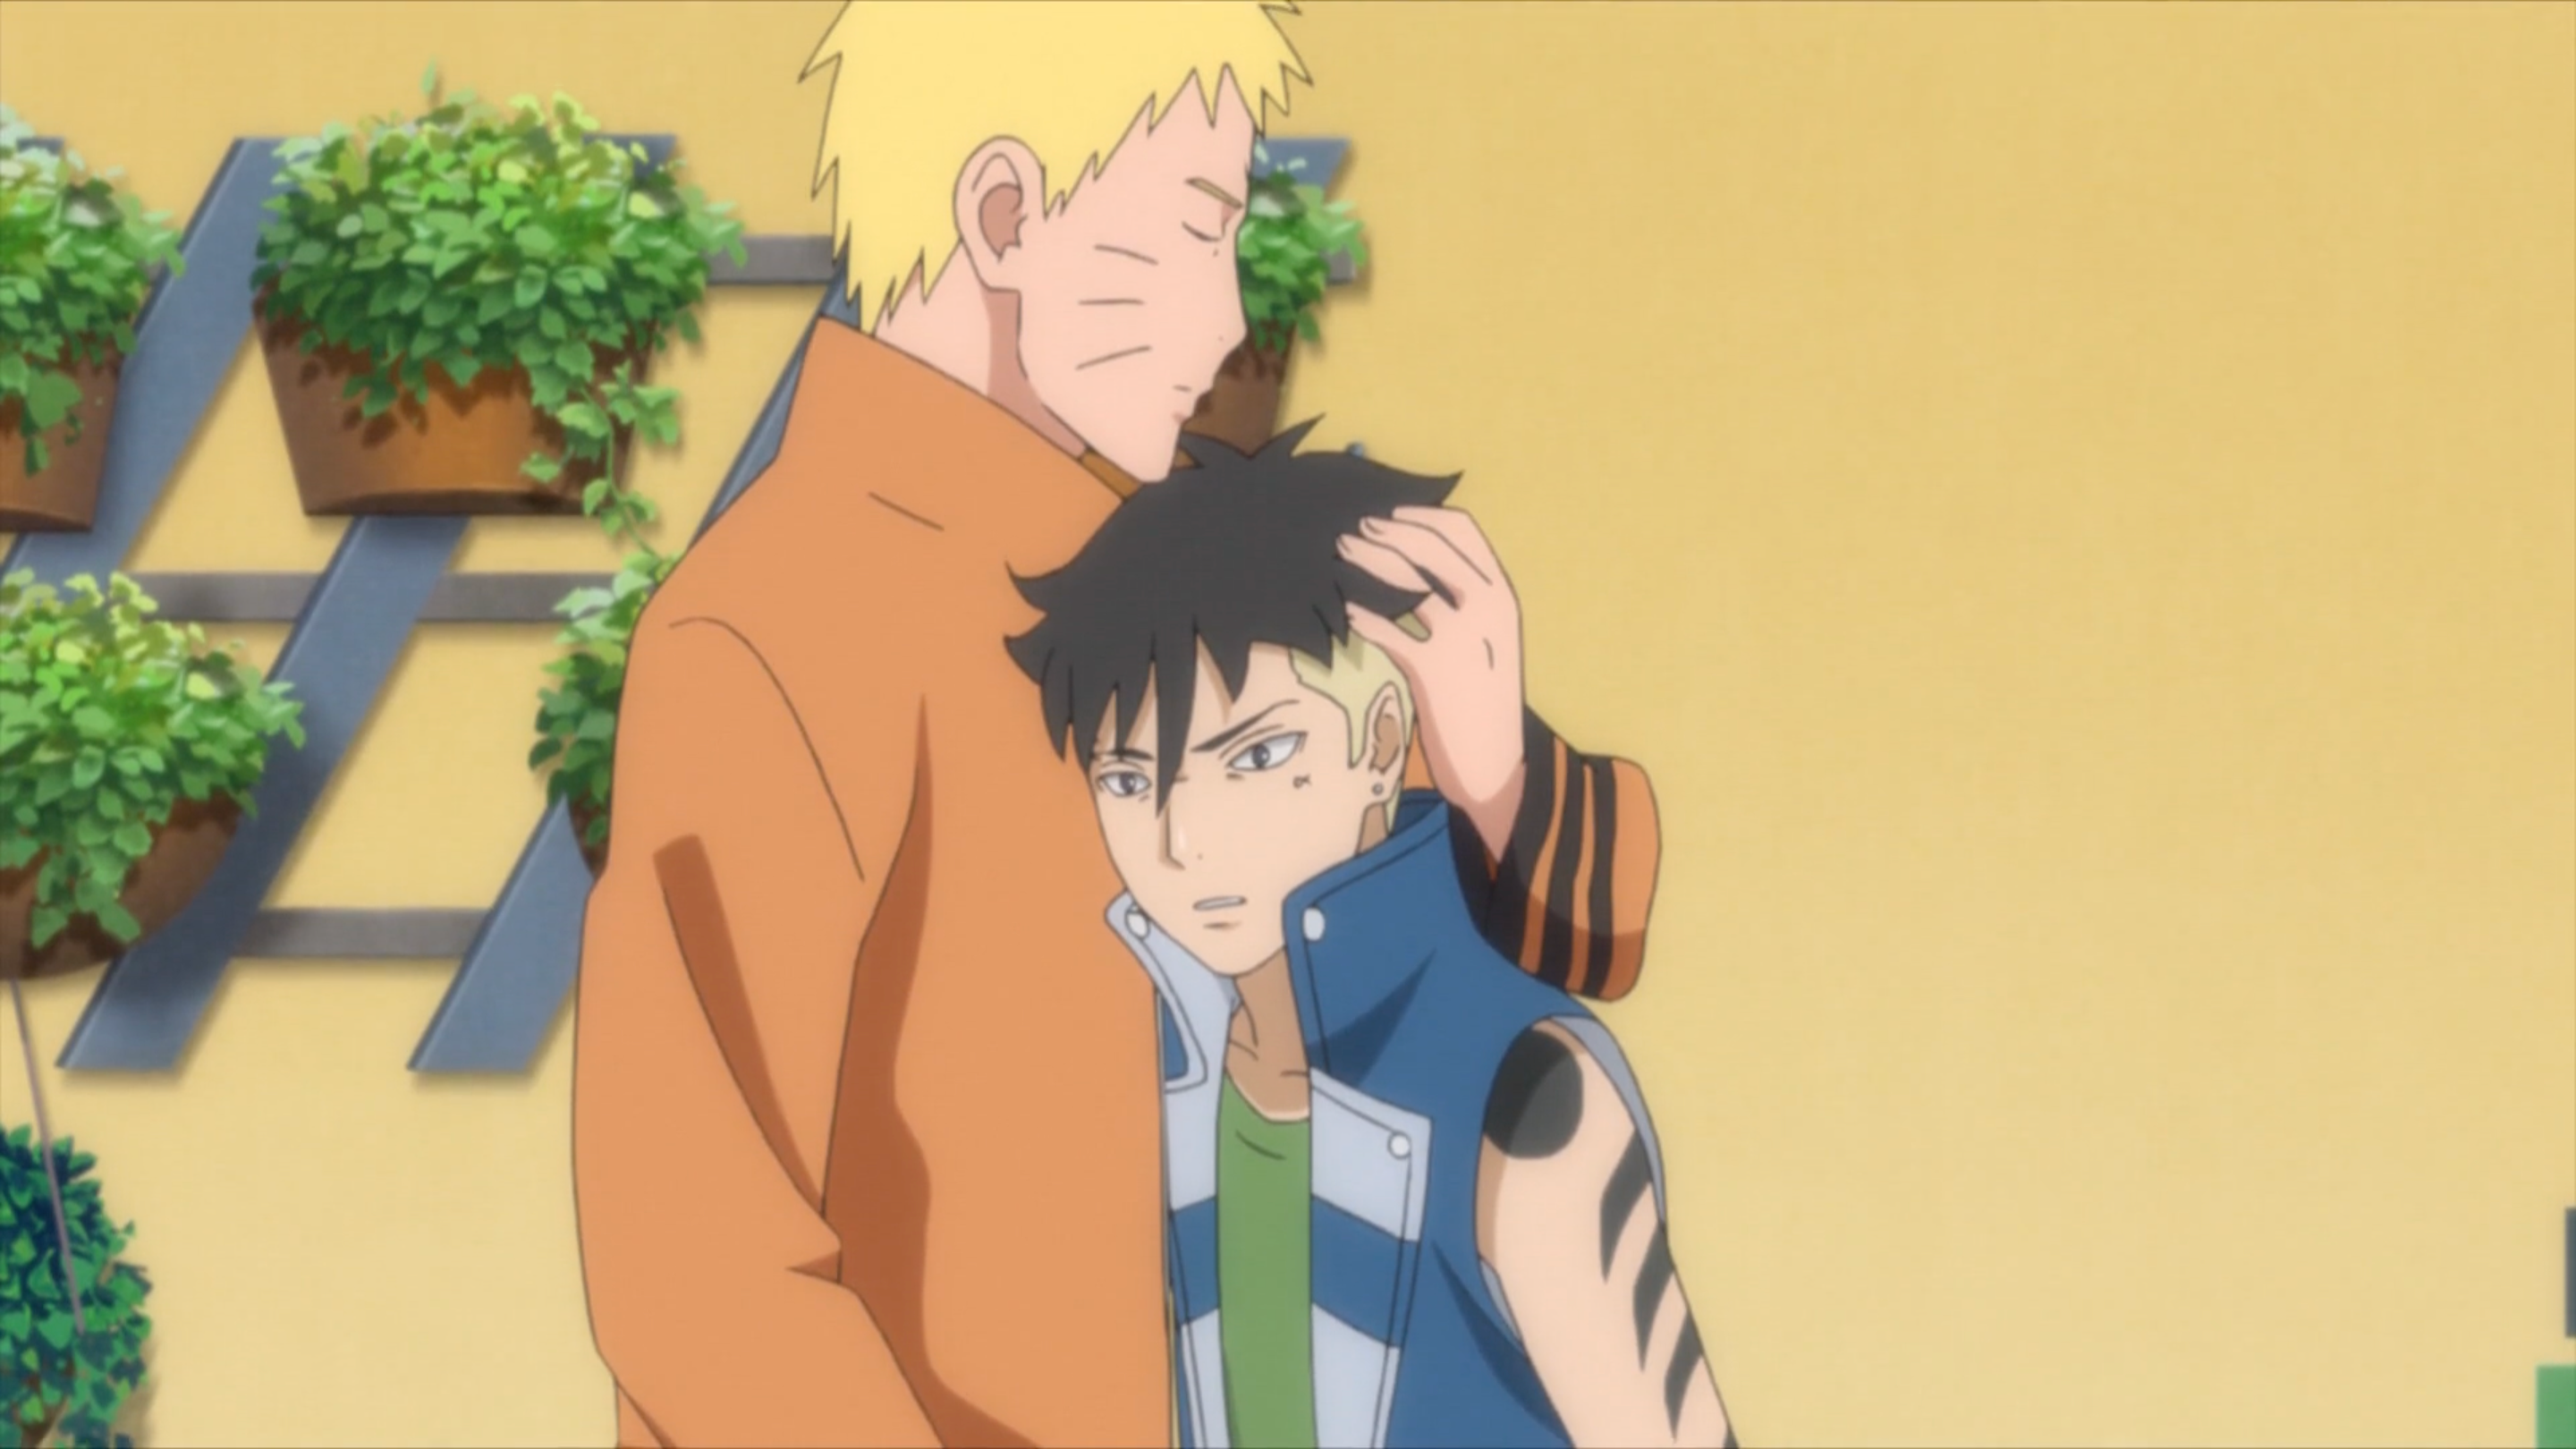 Boruto: Why Kawaki's Debut Fight Changes The Anime (For The Better)